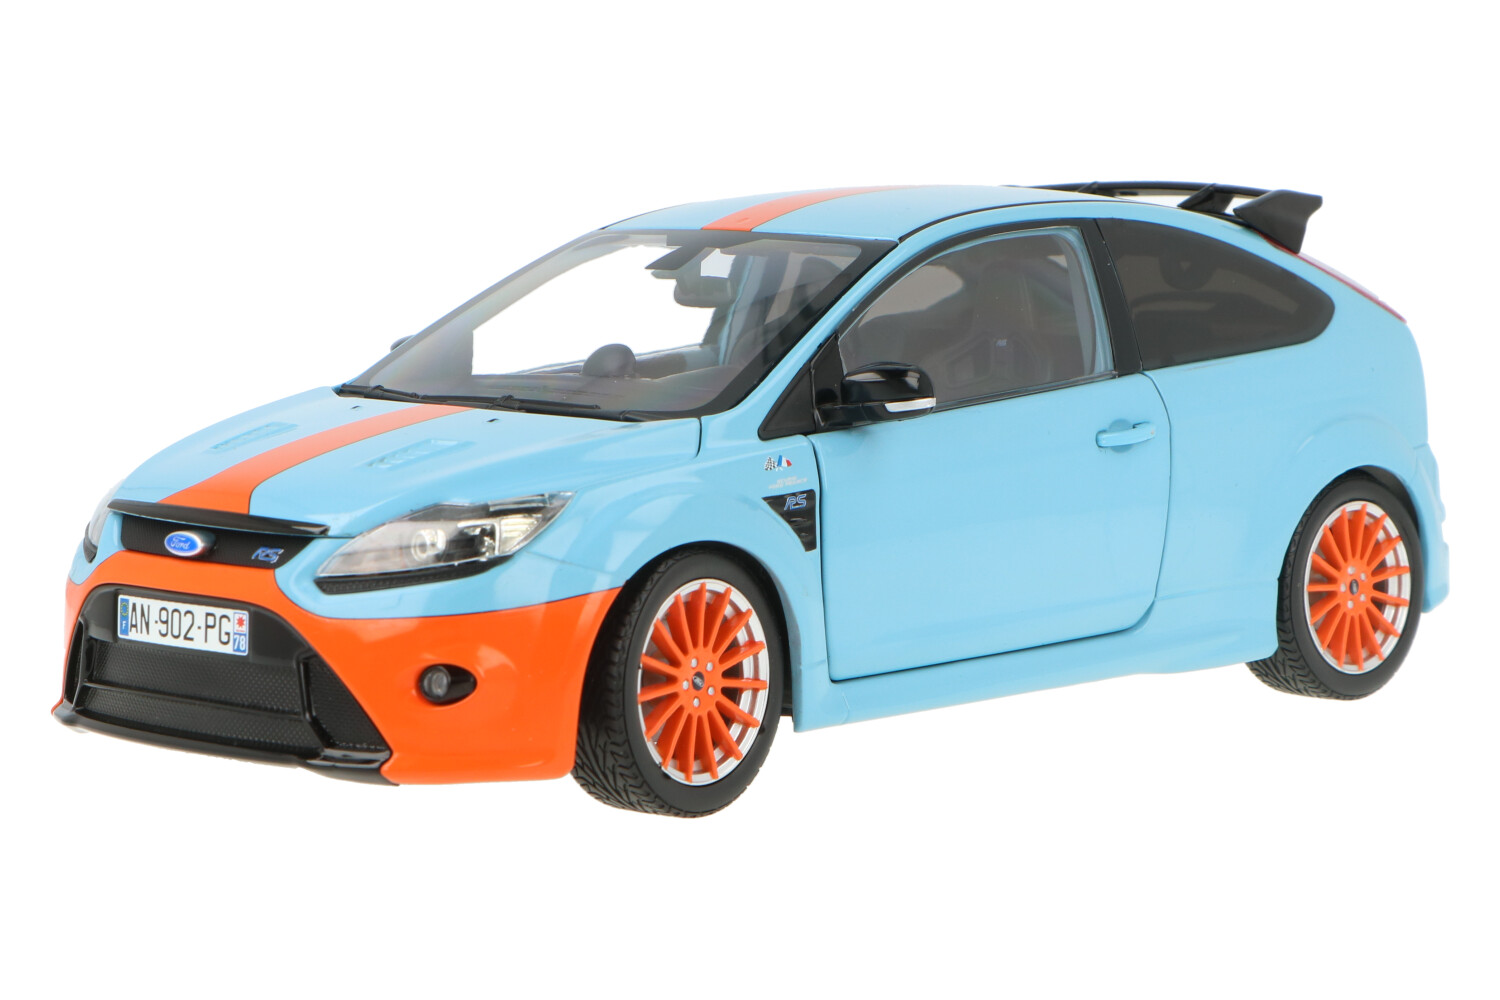 Ford-Focus-RS-100080068_13154012138109919Ford-Focus-RS-100080068_Houseofmodelcars_.jpg